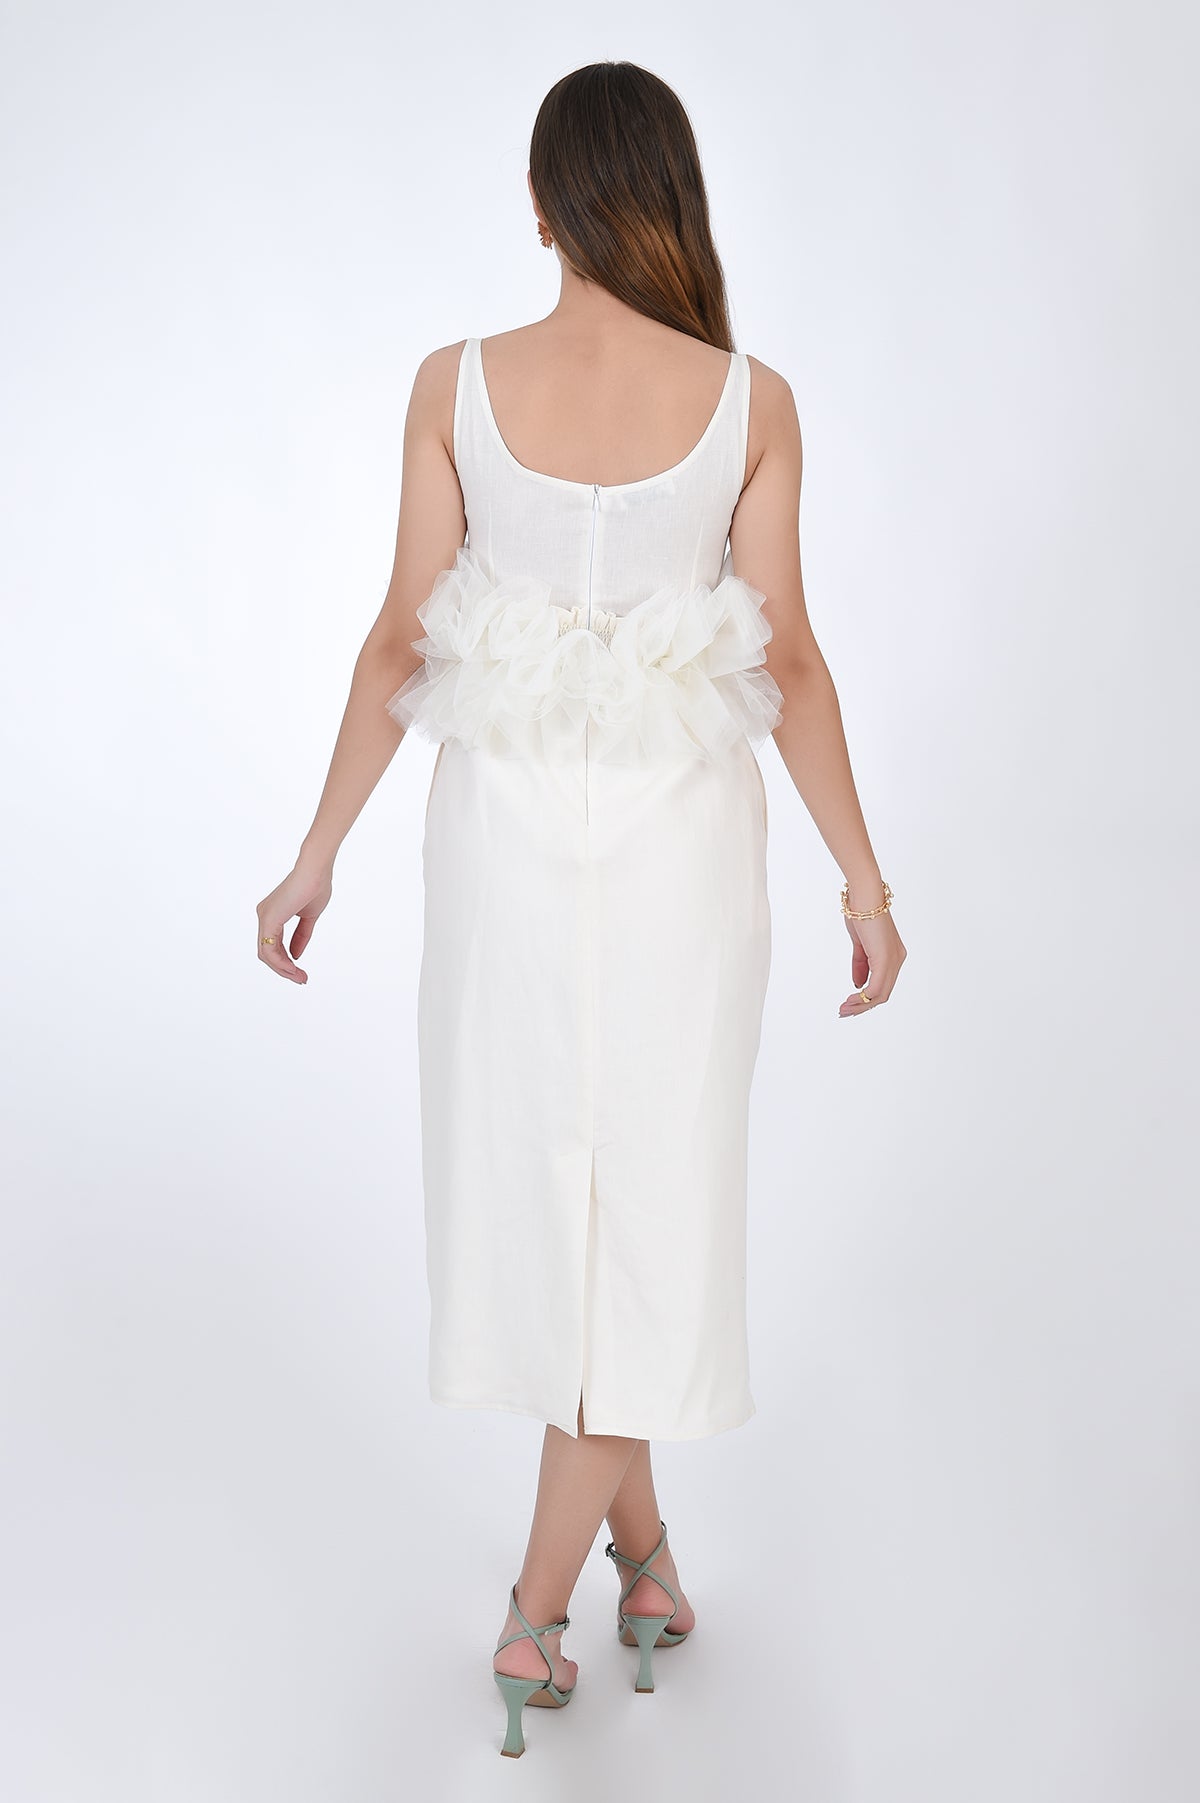 Fanm Mon Citra Linen & Tulle Midi Dress, back view. Featuring embroidery detail at the chest, and tulling at the waist.  